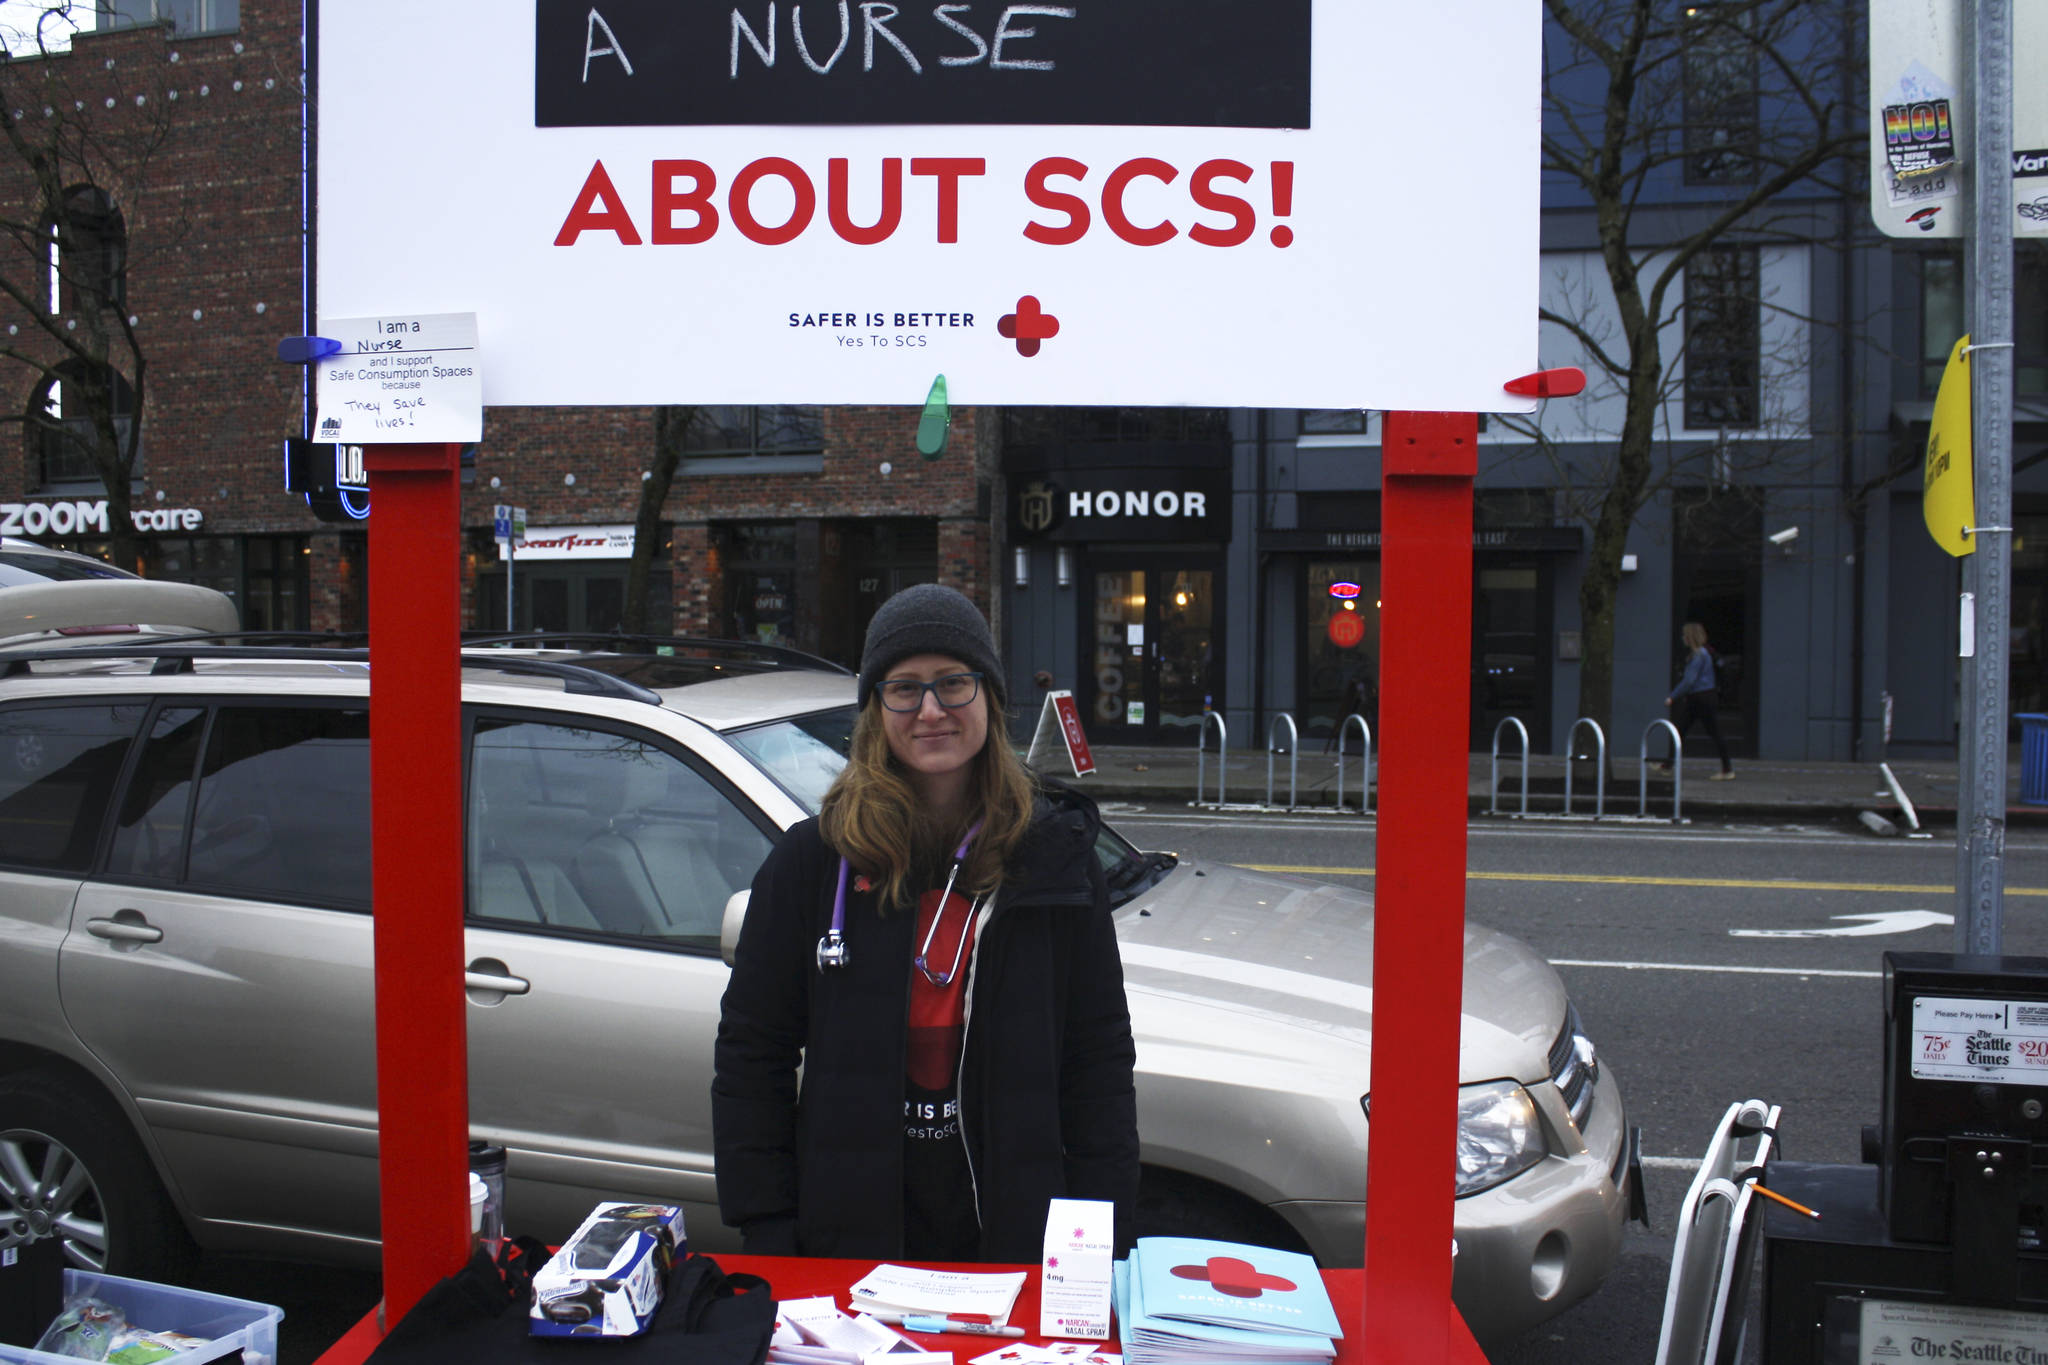 Mandy Sladky, a registered nurse, answers questions about safe consumption spaces at a public information booth outside of the Capitol Hill light rail station on February 7, 2018. Photo by Melissa Hellmann